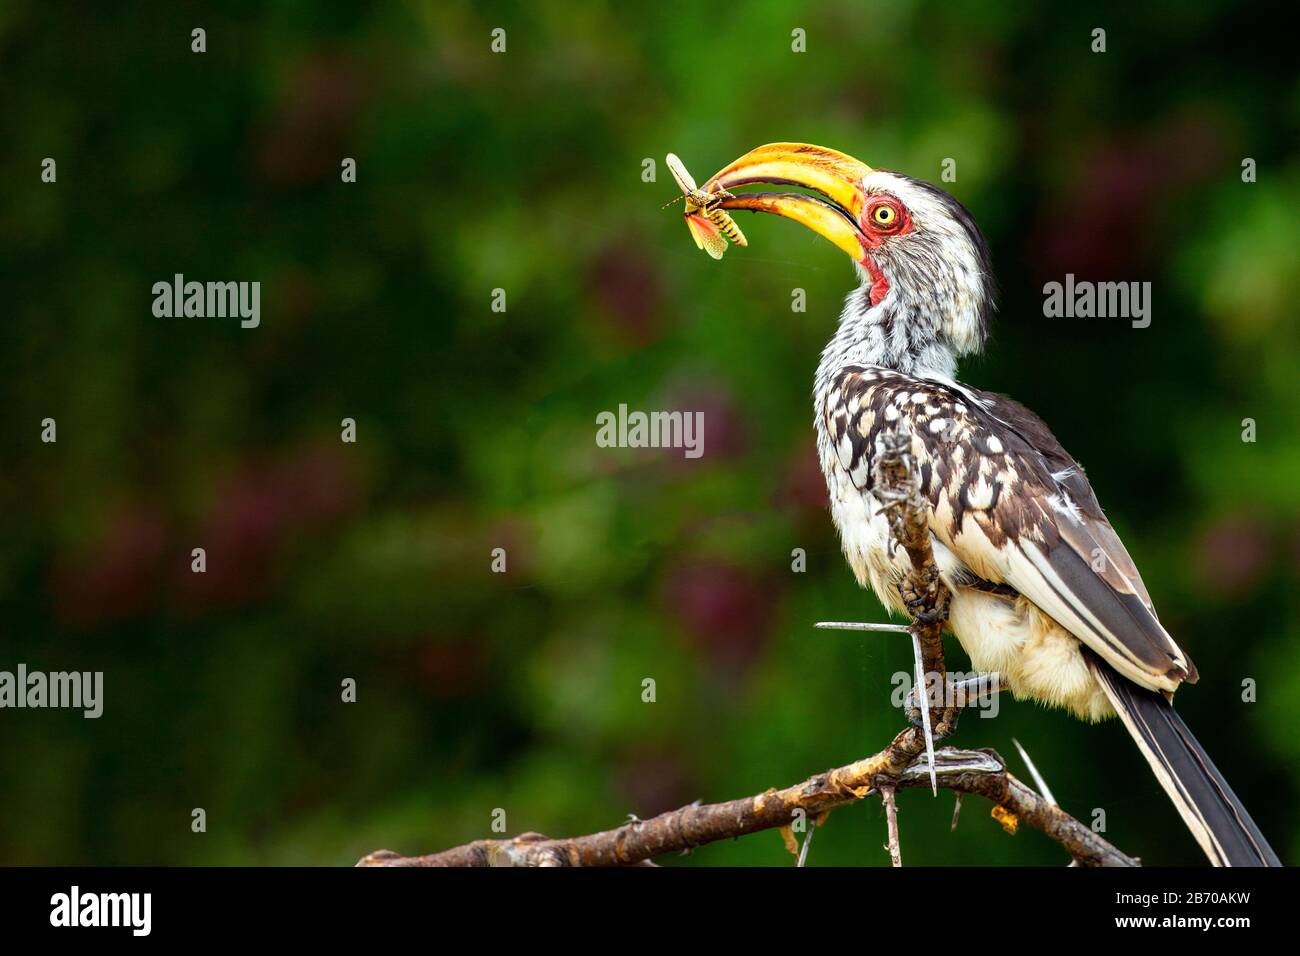 Southern Yellow-billed Hornbill with Locust prey in the Kruger National Park, South Africa Stock Photo